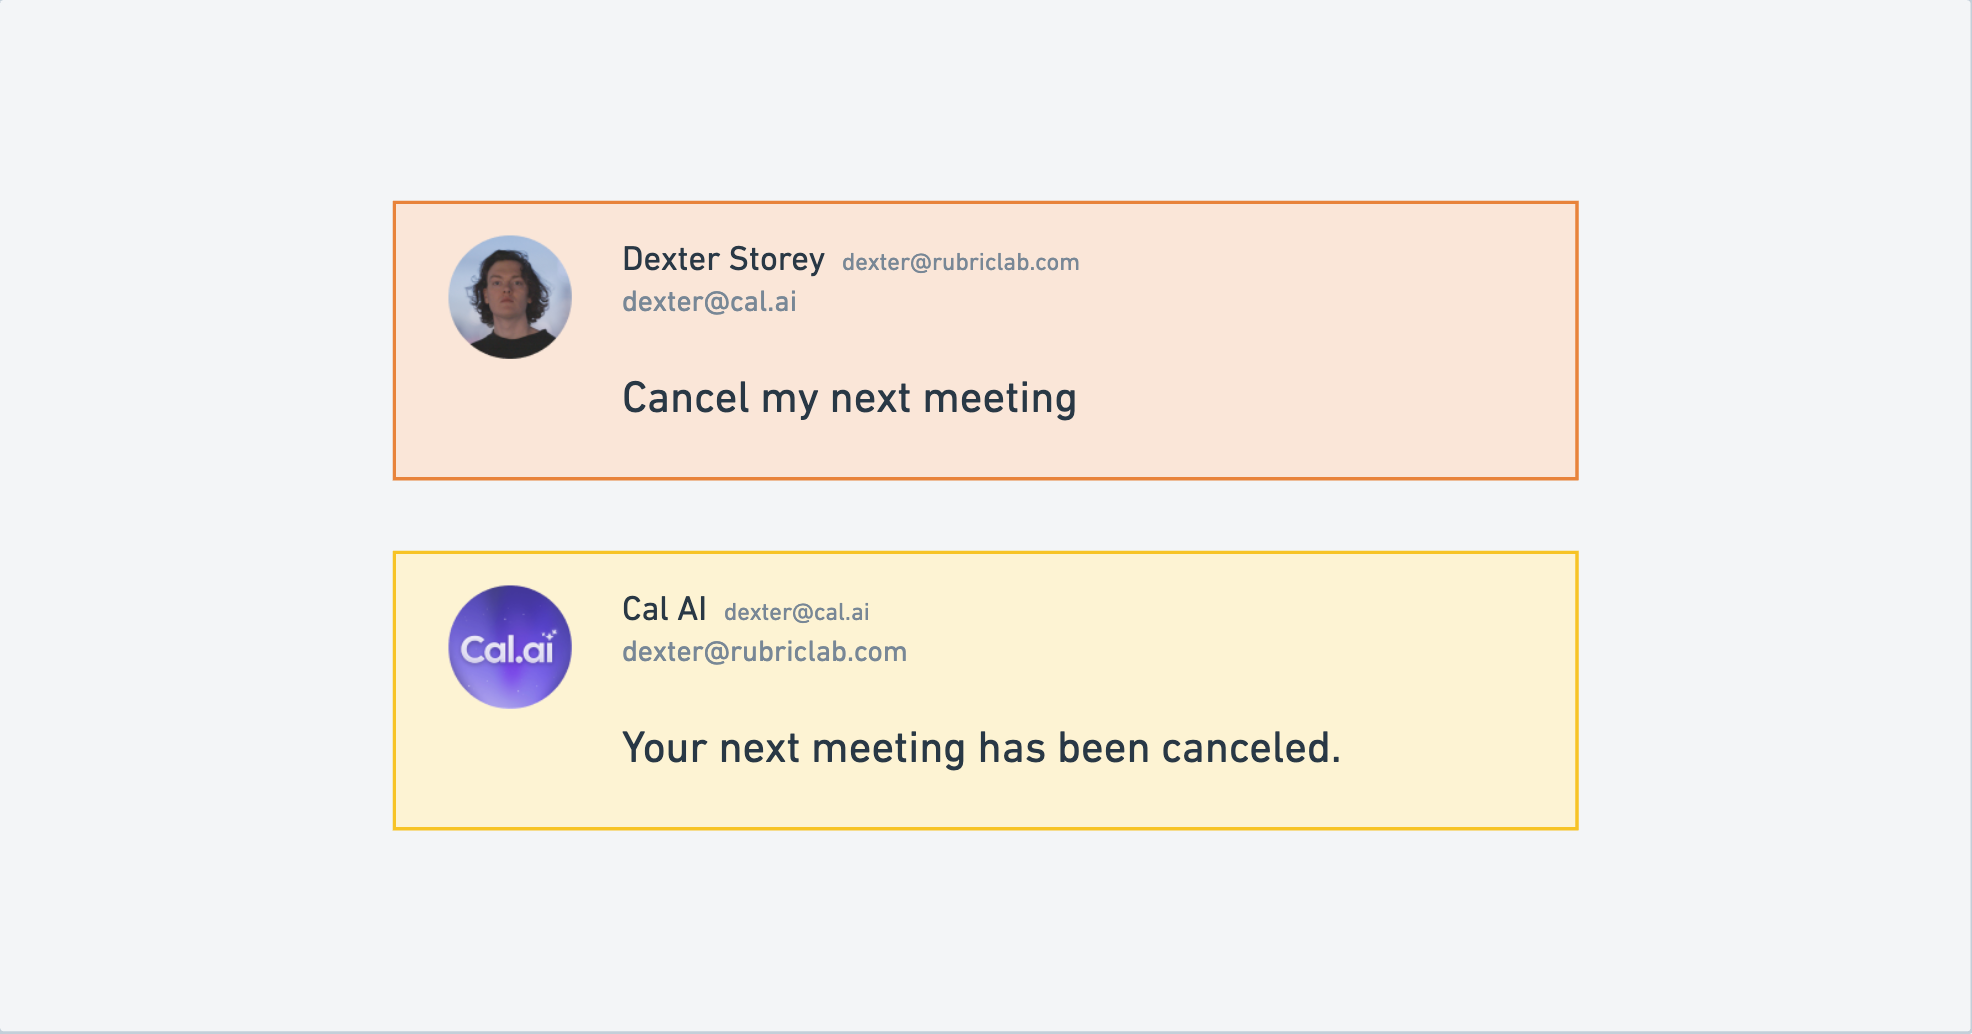 An outline of the email interaction with Cal.ai. Dexter says cancel my next meeting. Cal AI gets it done.